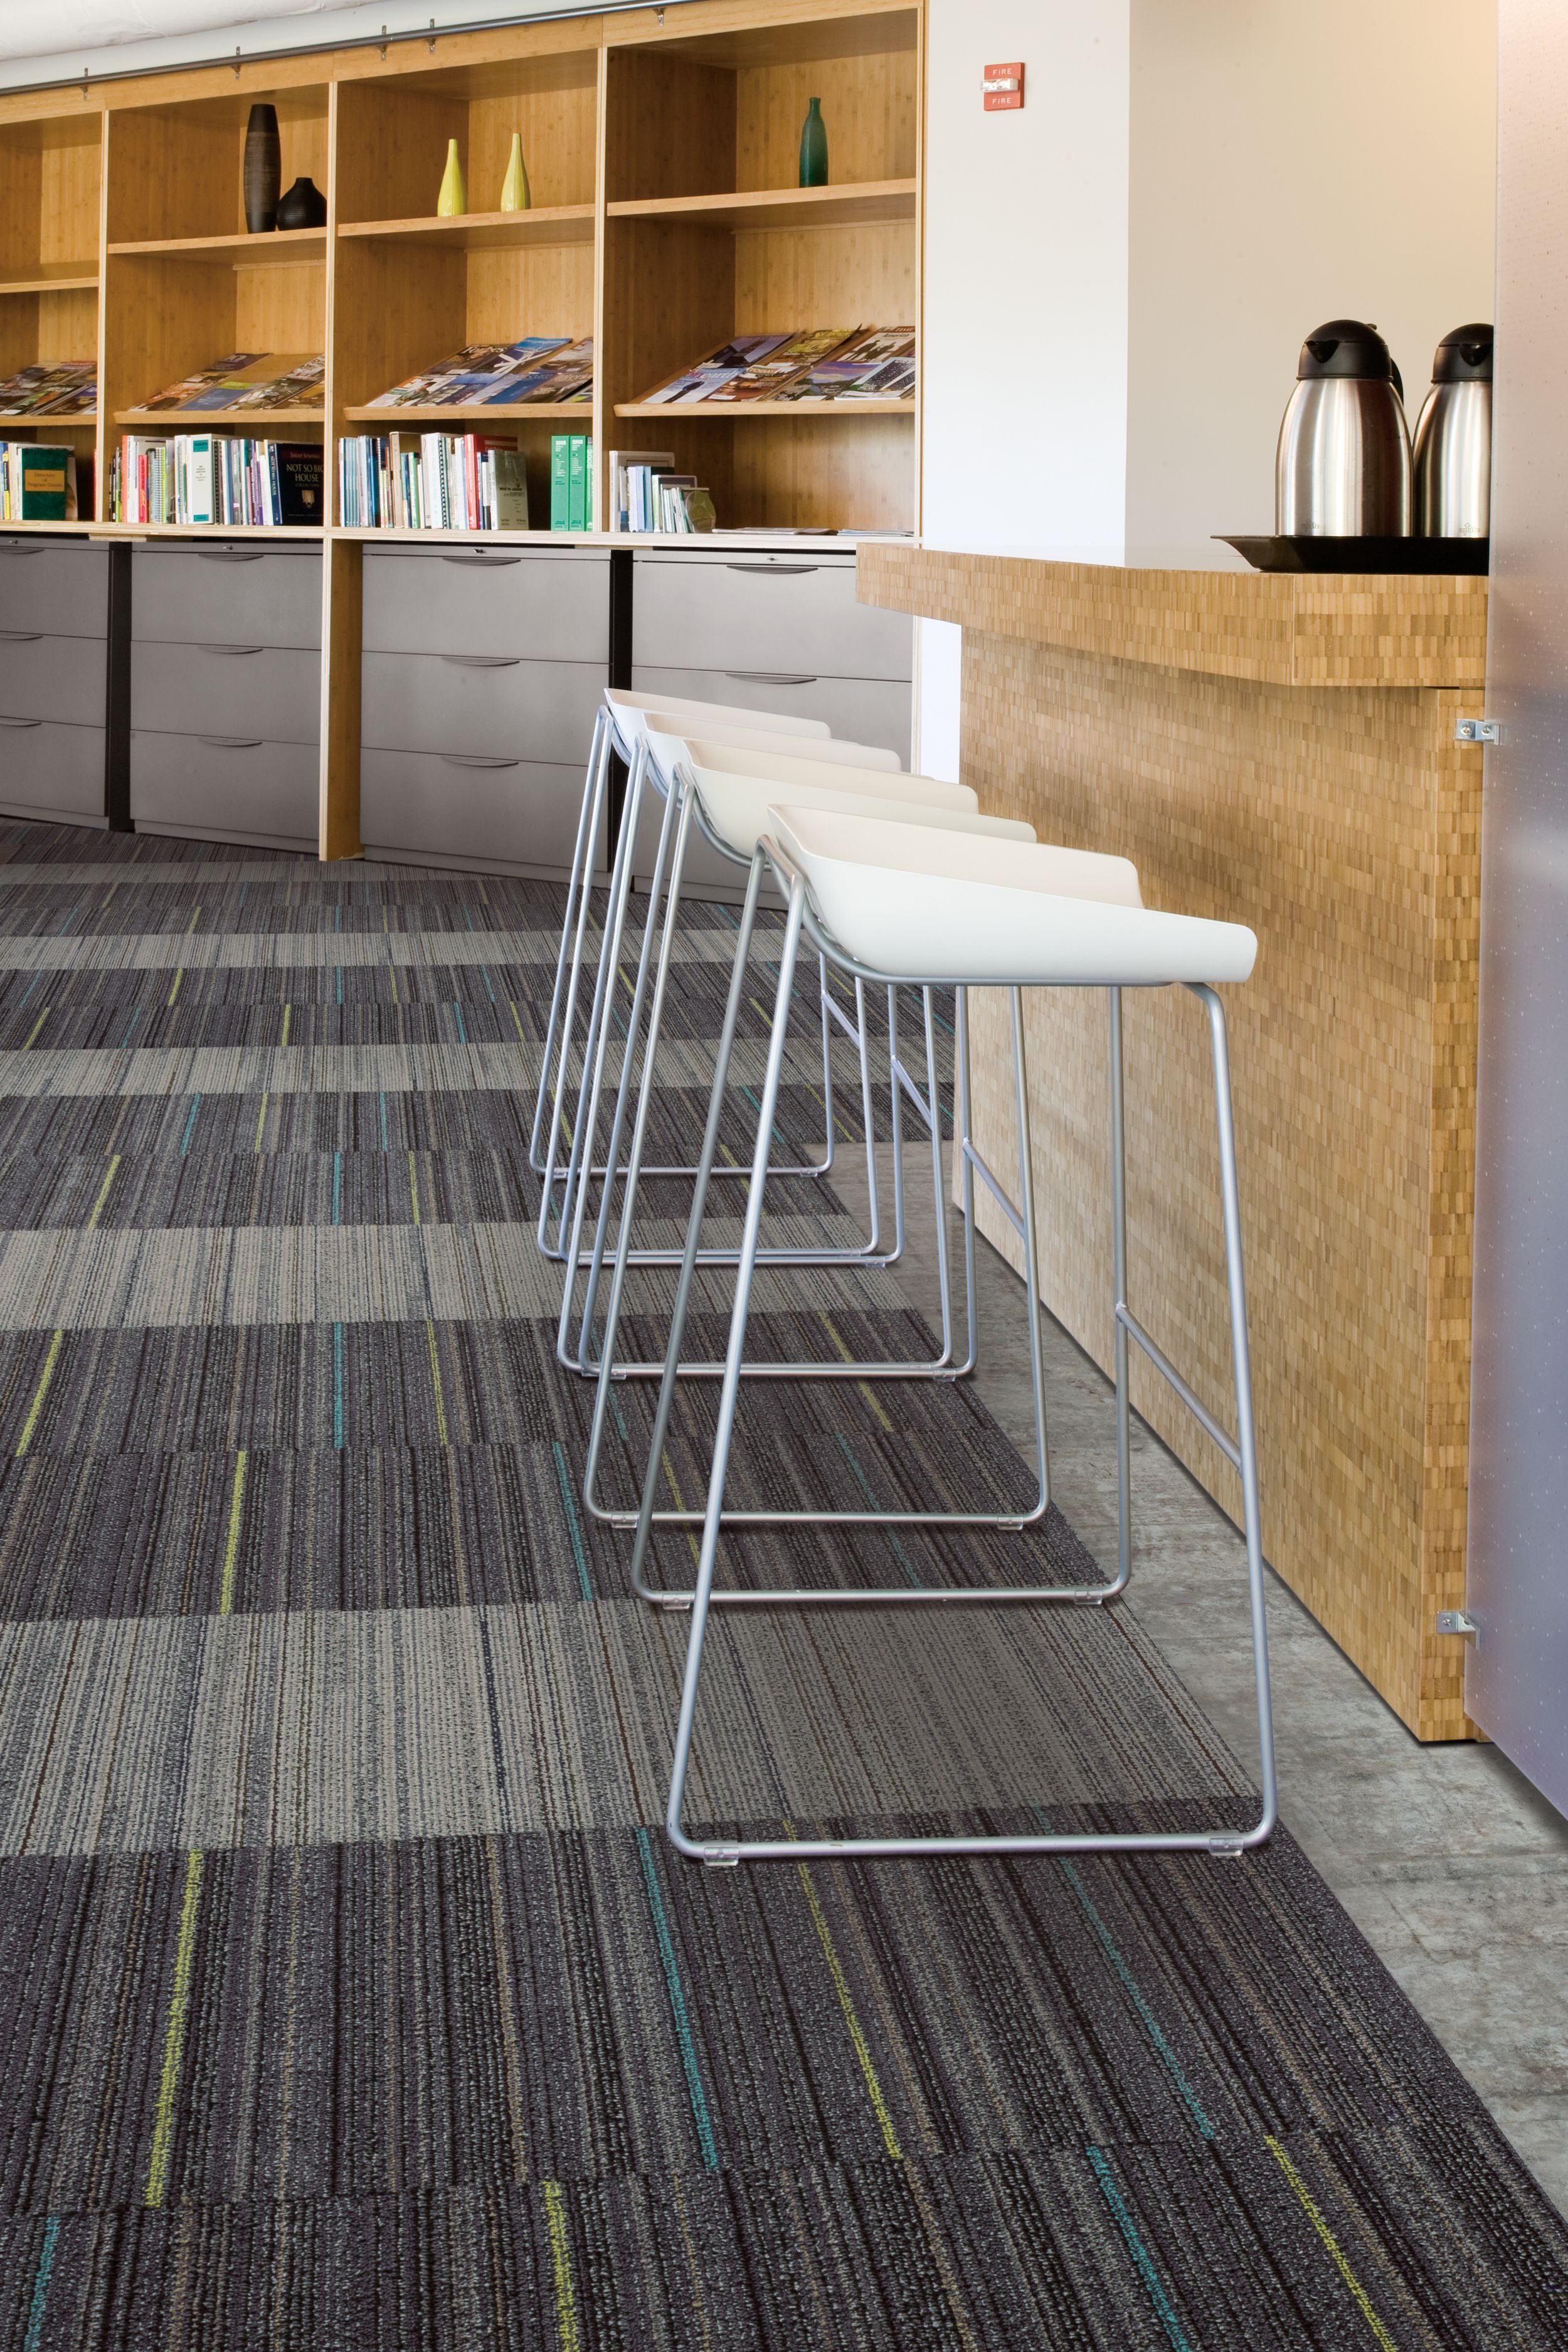 Interface Primary Stitch and Sew Straight carpet tile with Textured Stones LVT in cafe area with high top seating imagen número 10